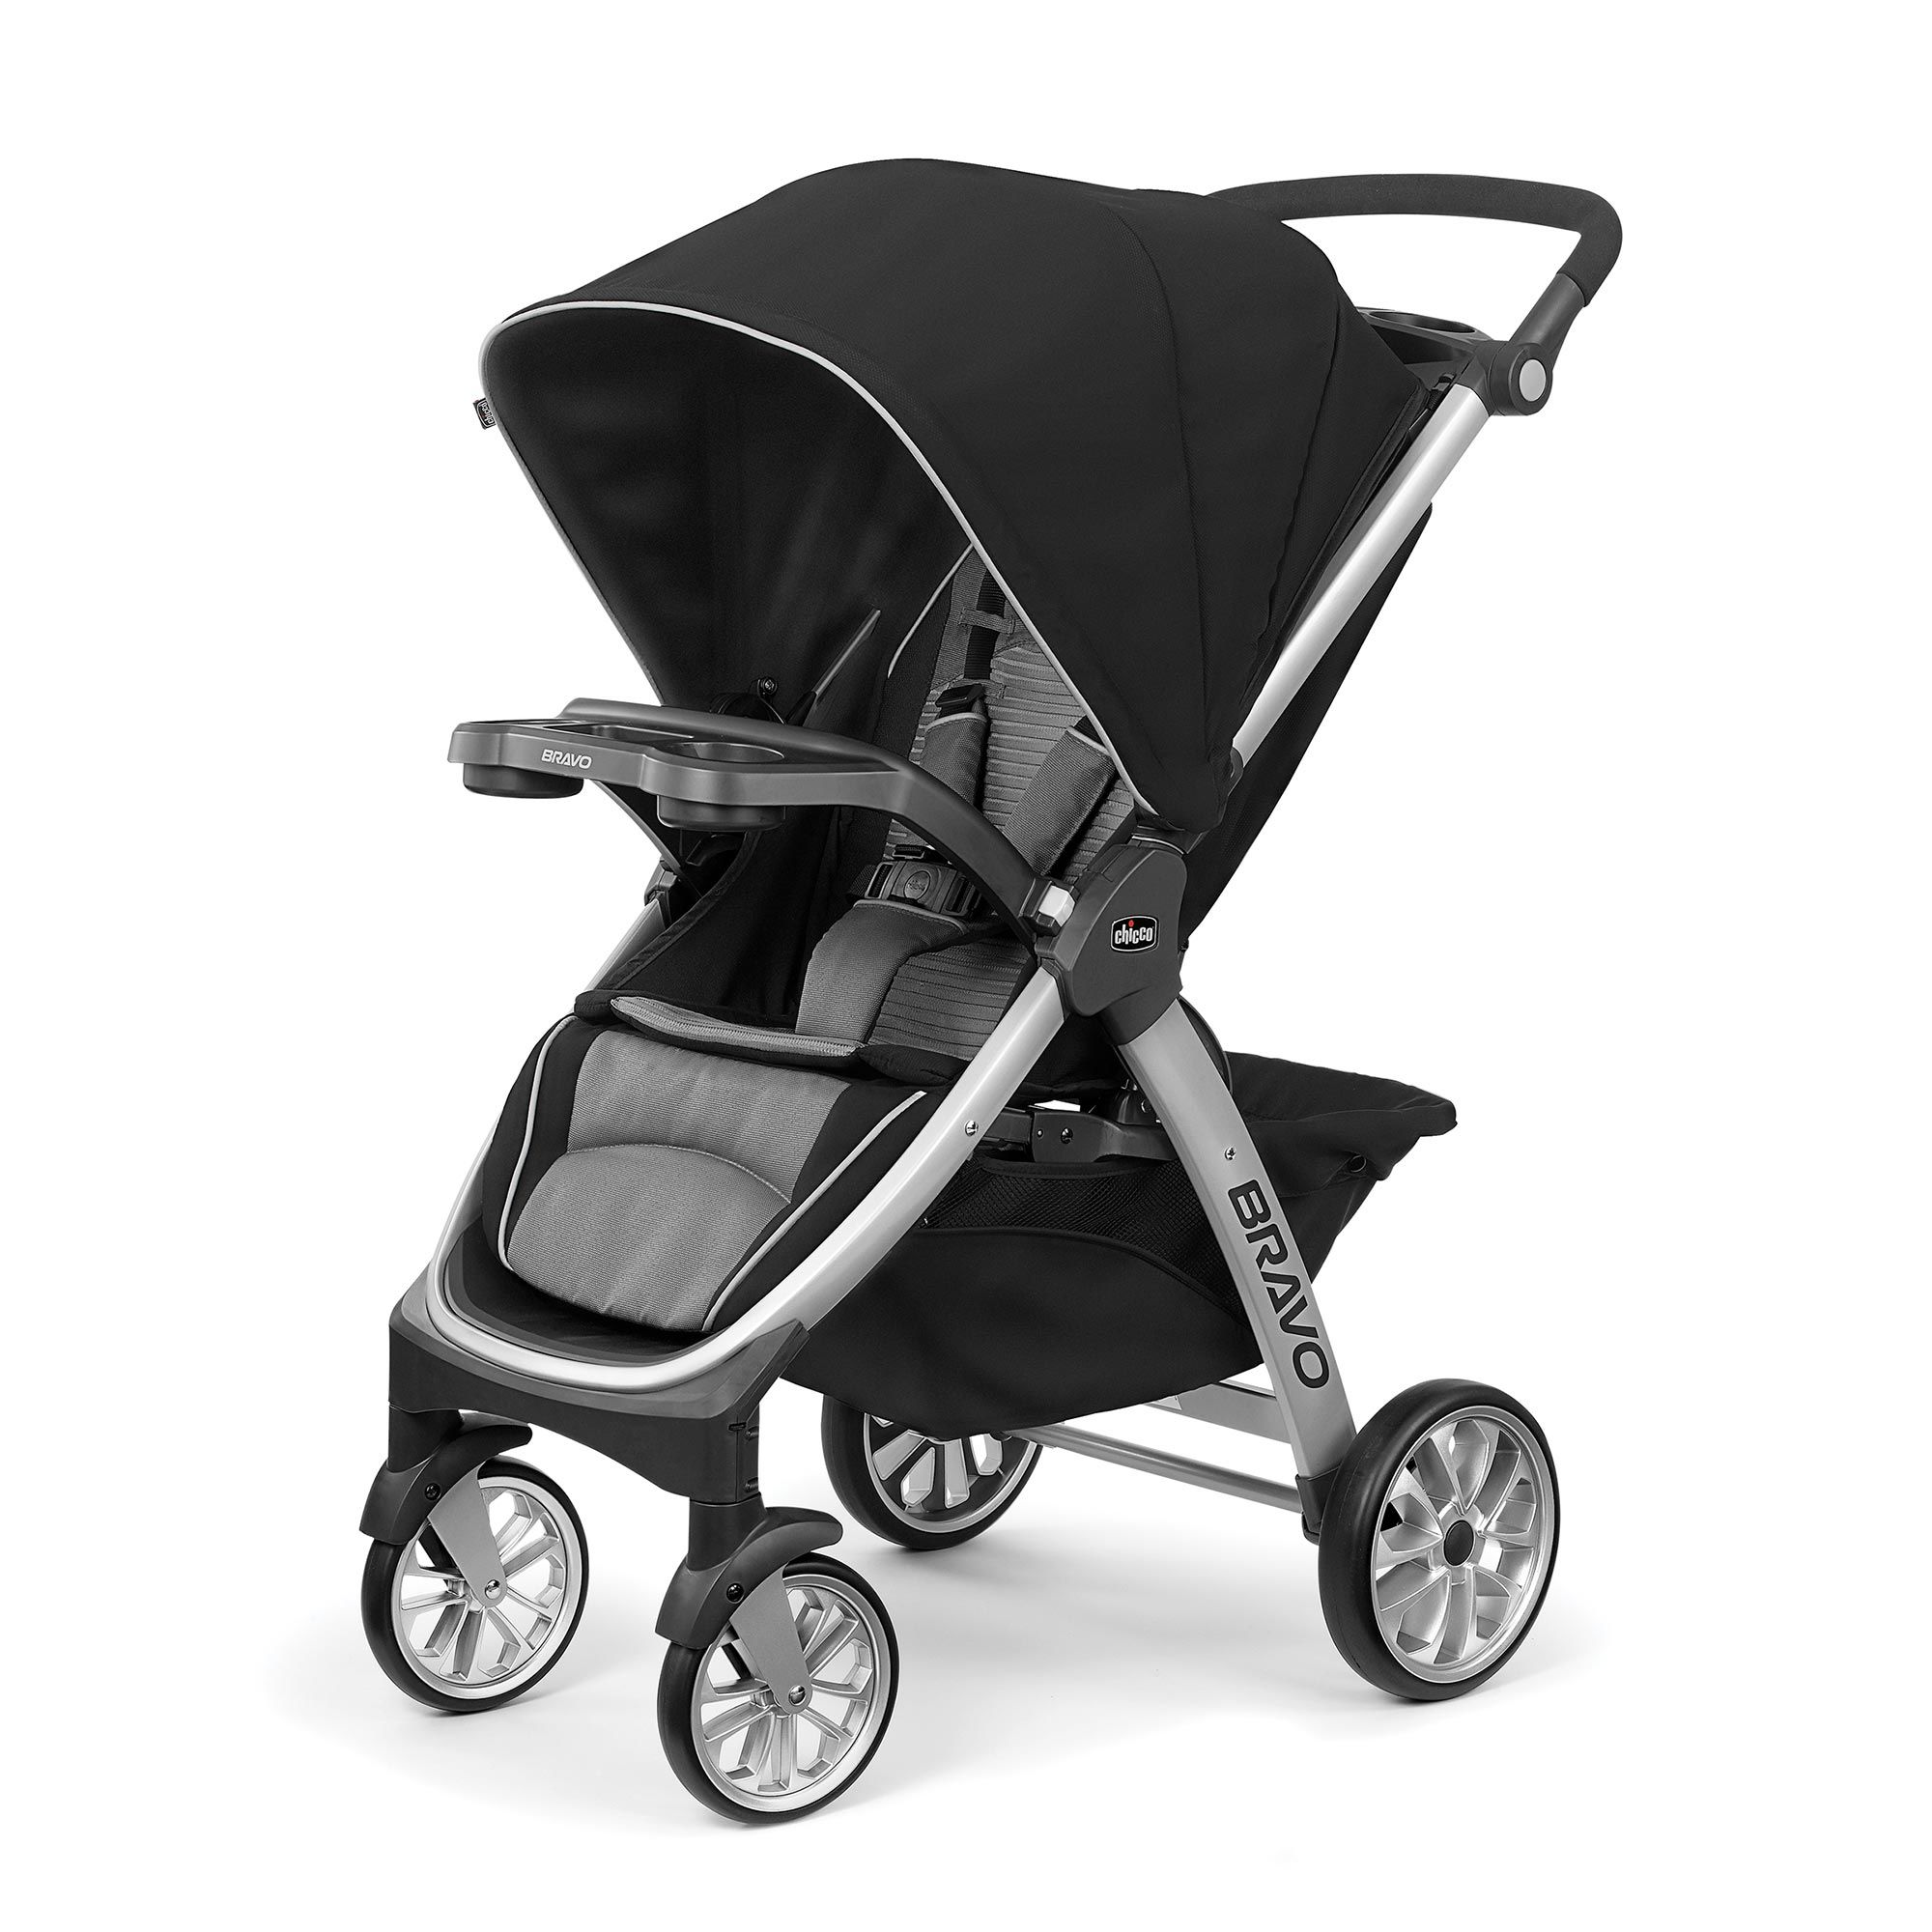 chicco travel stroller reviews